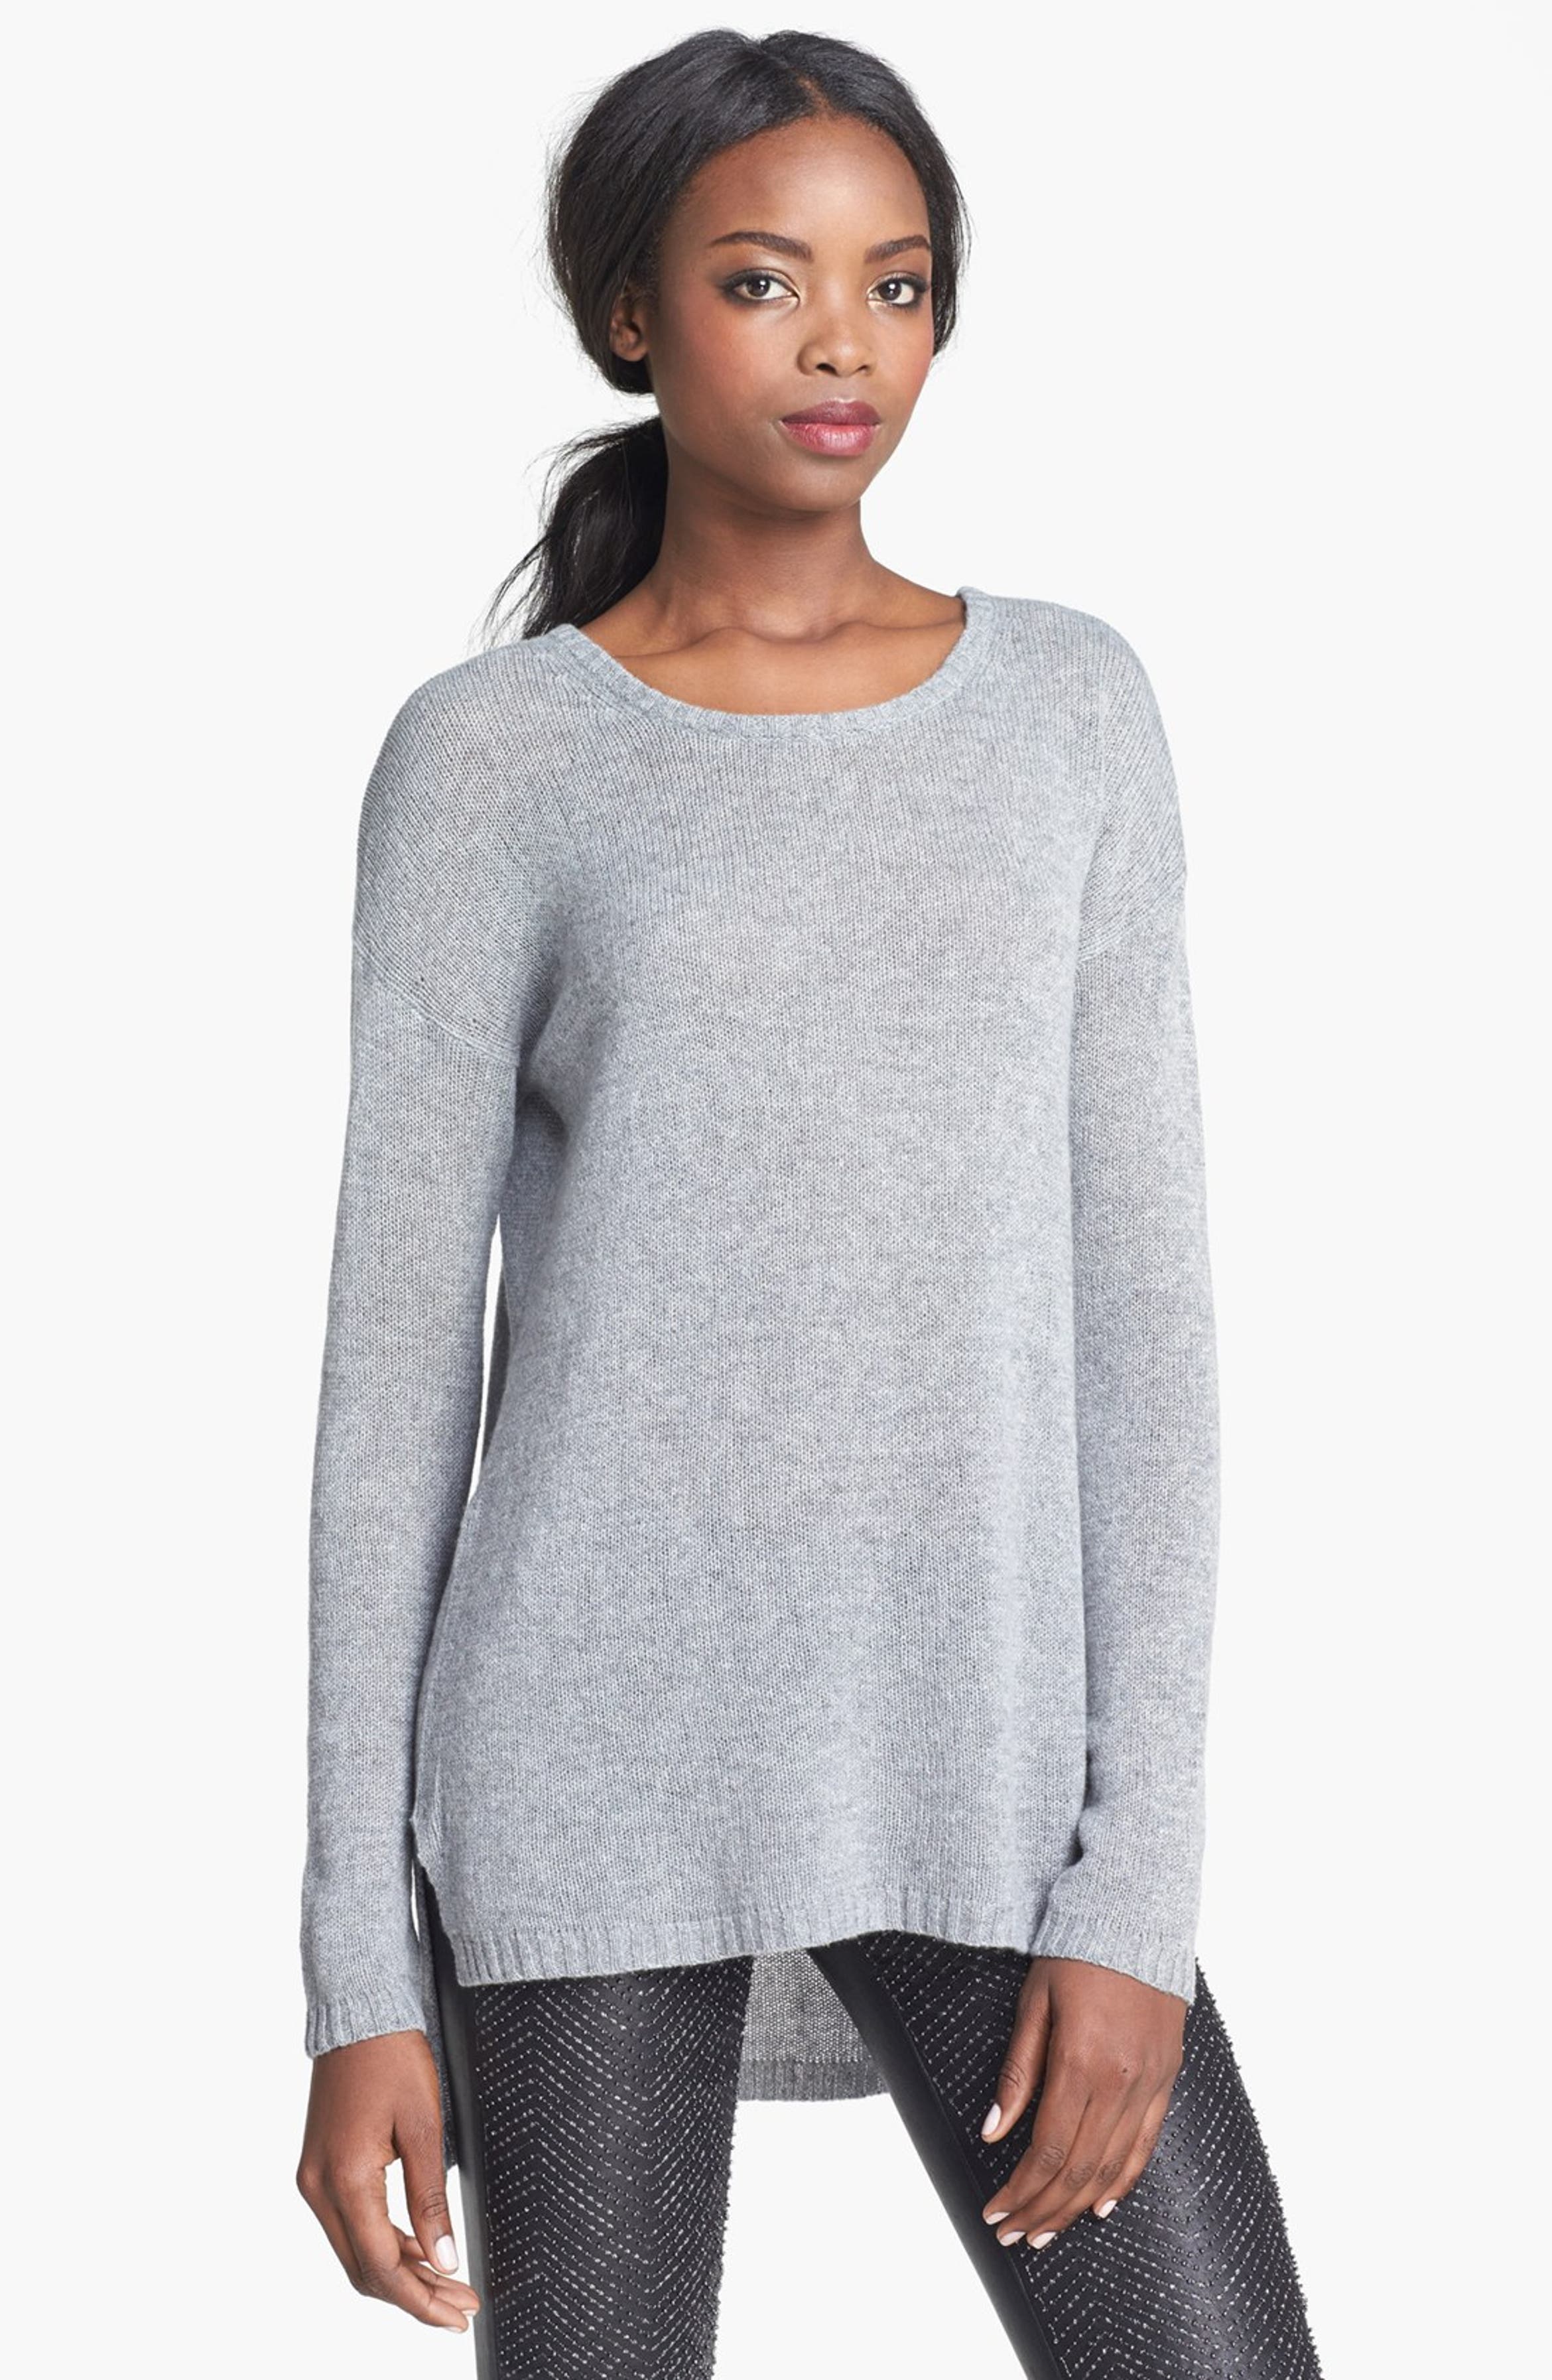 autumn cashmere High/Low Cashmere Sweater | Nordstrom